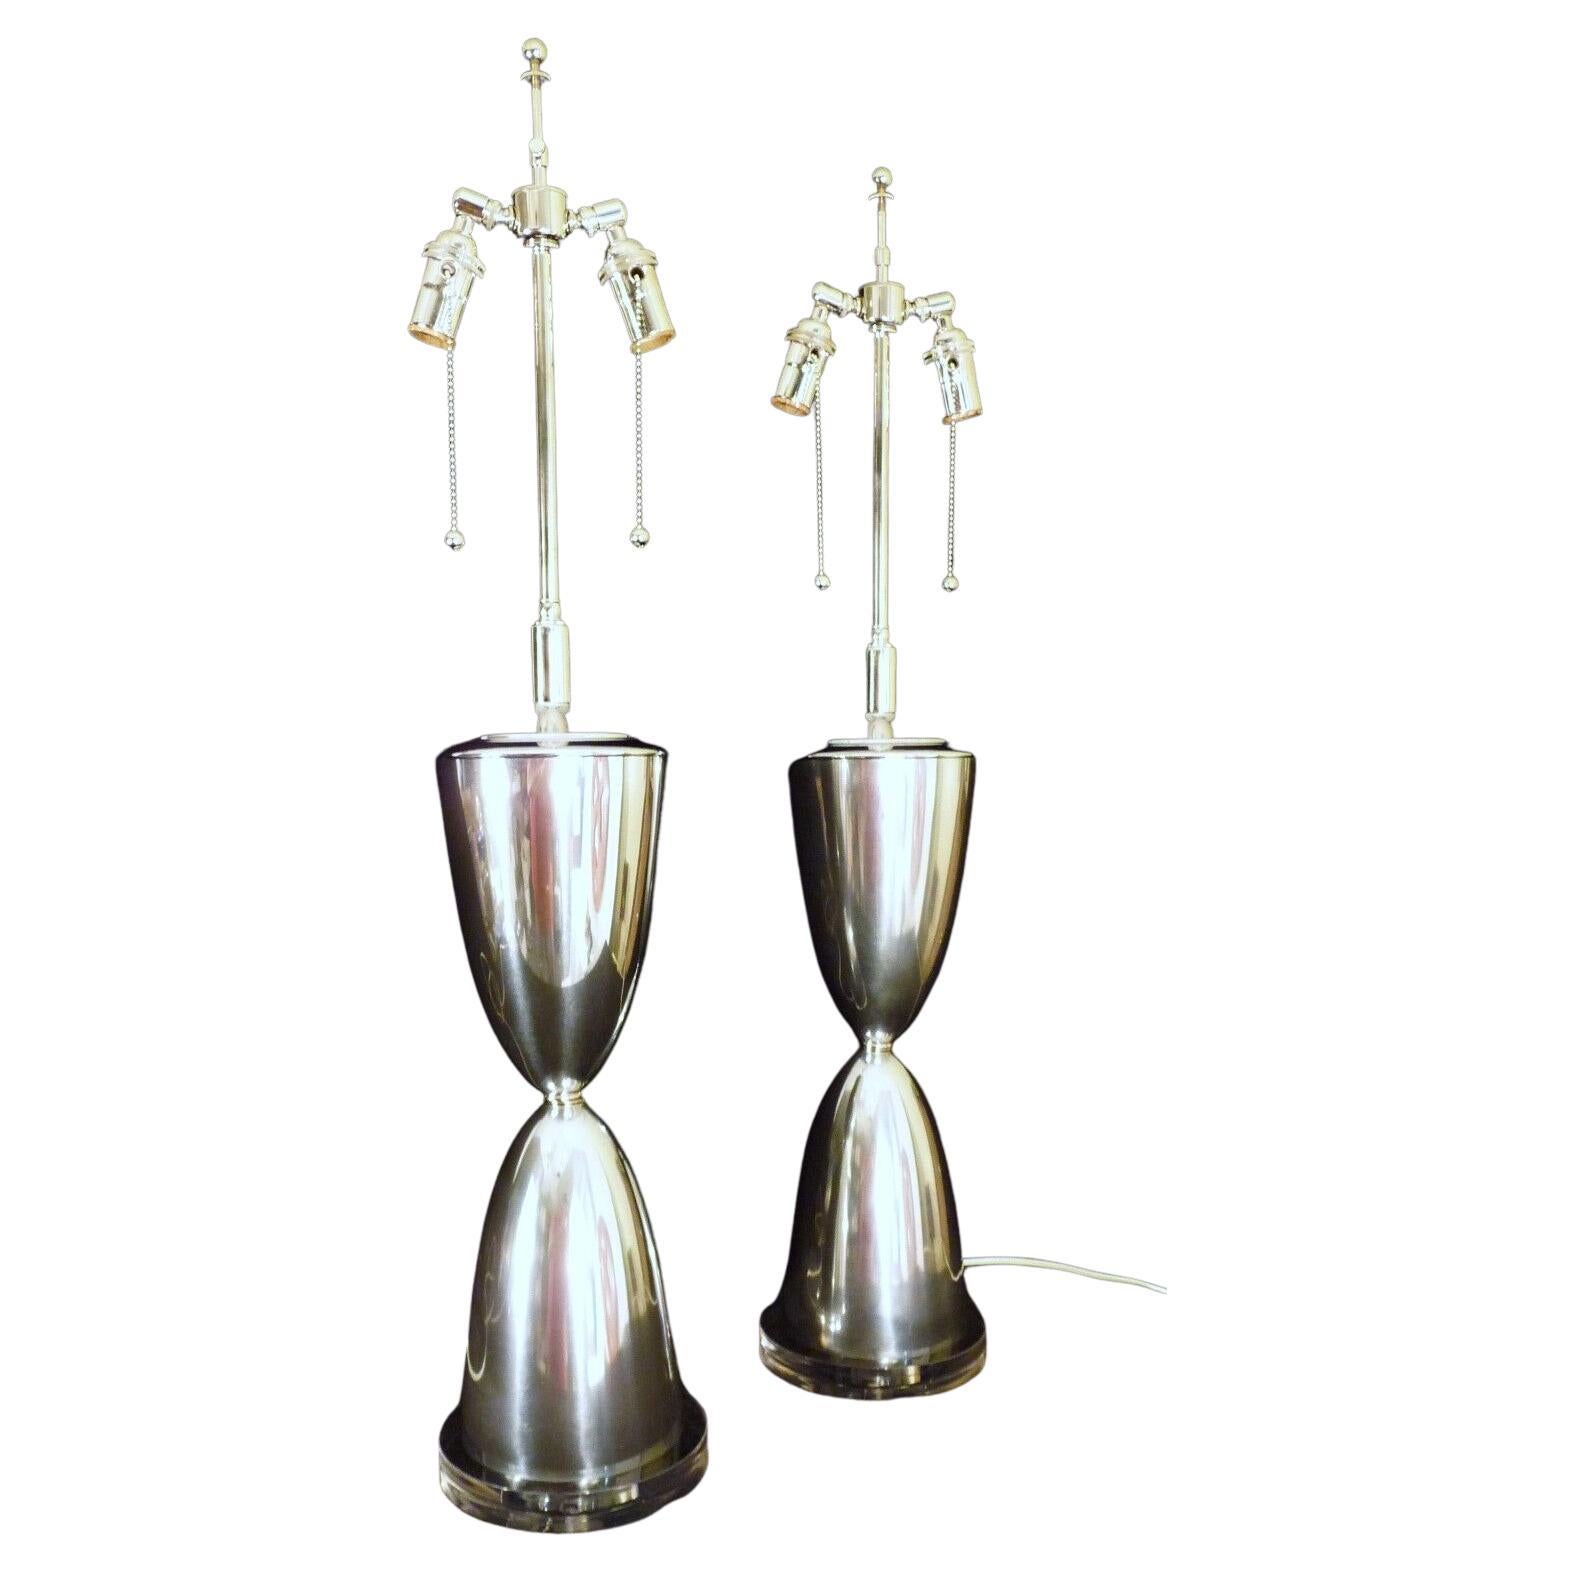 Pair of Mid-Century Modern Polished Aluminum & Lucite Architectural Table Lamps